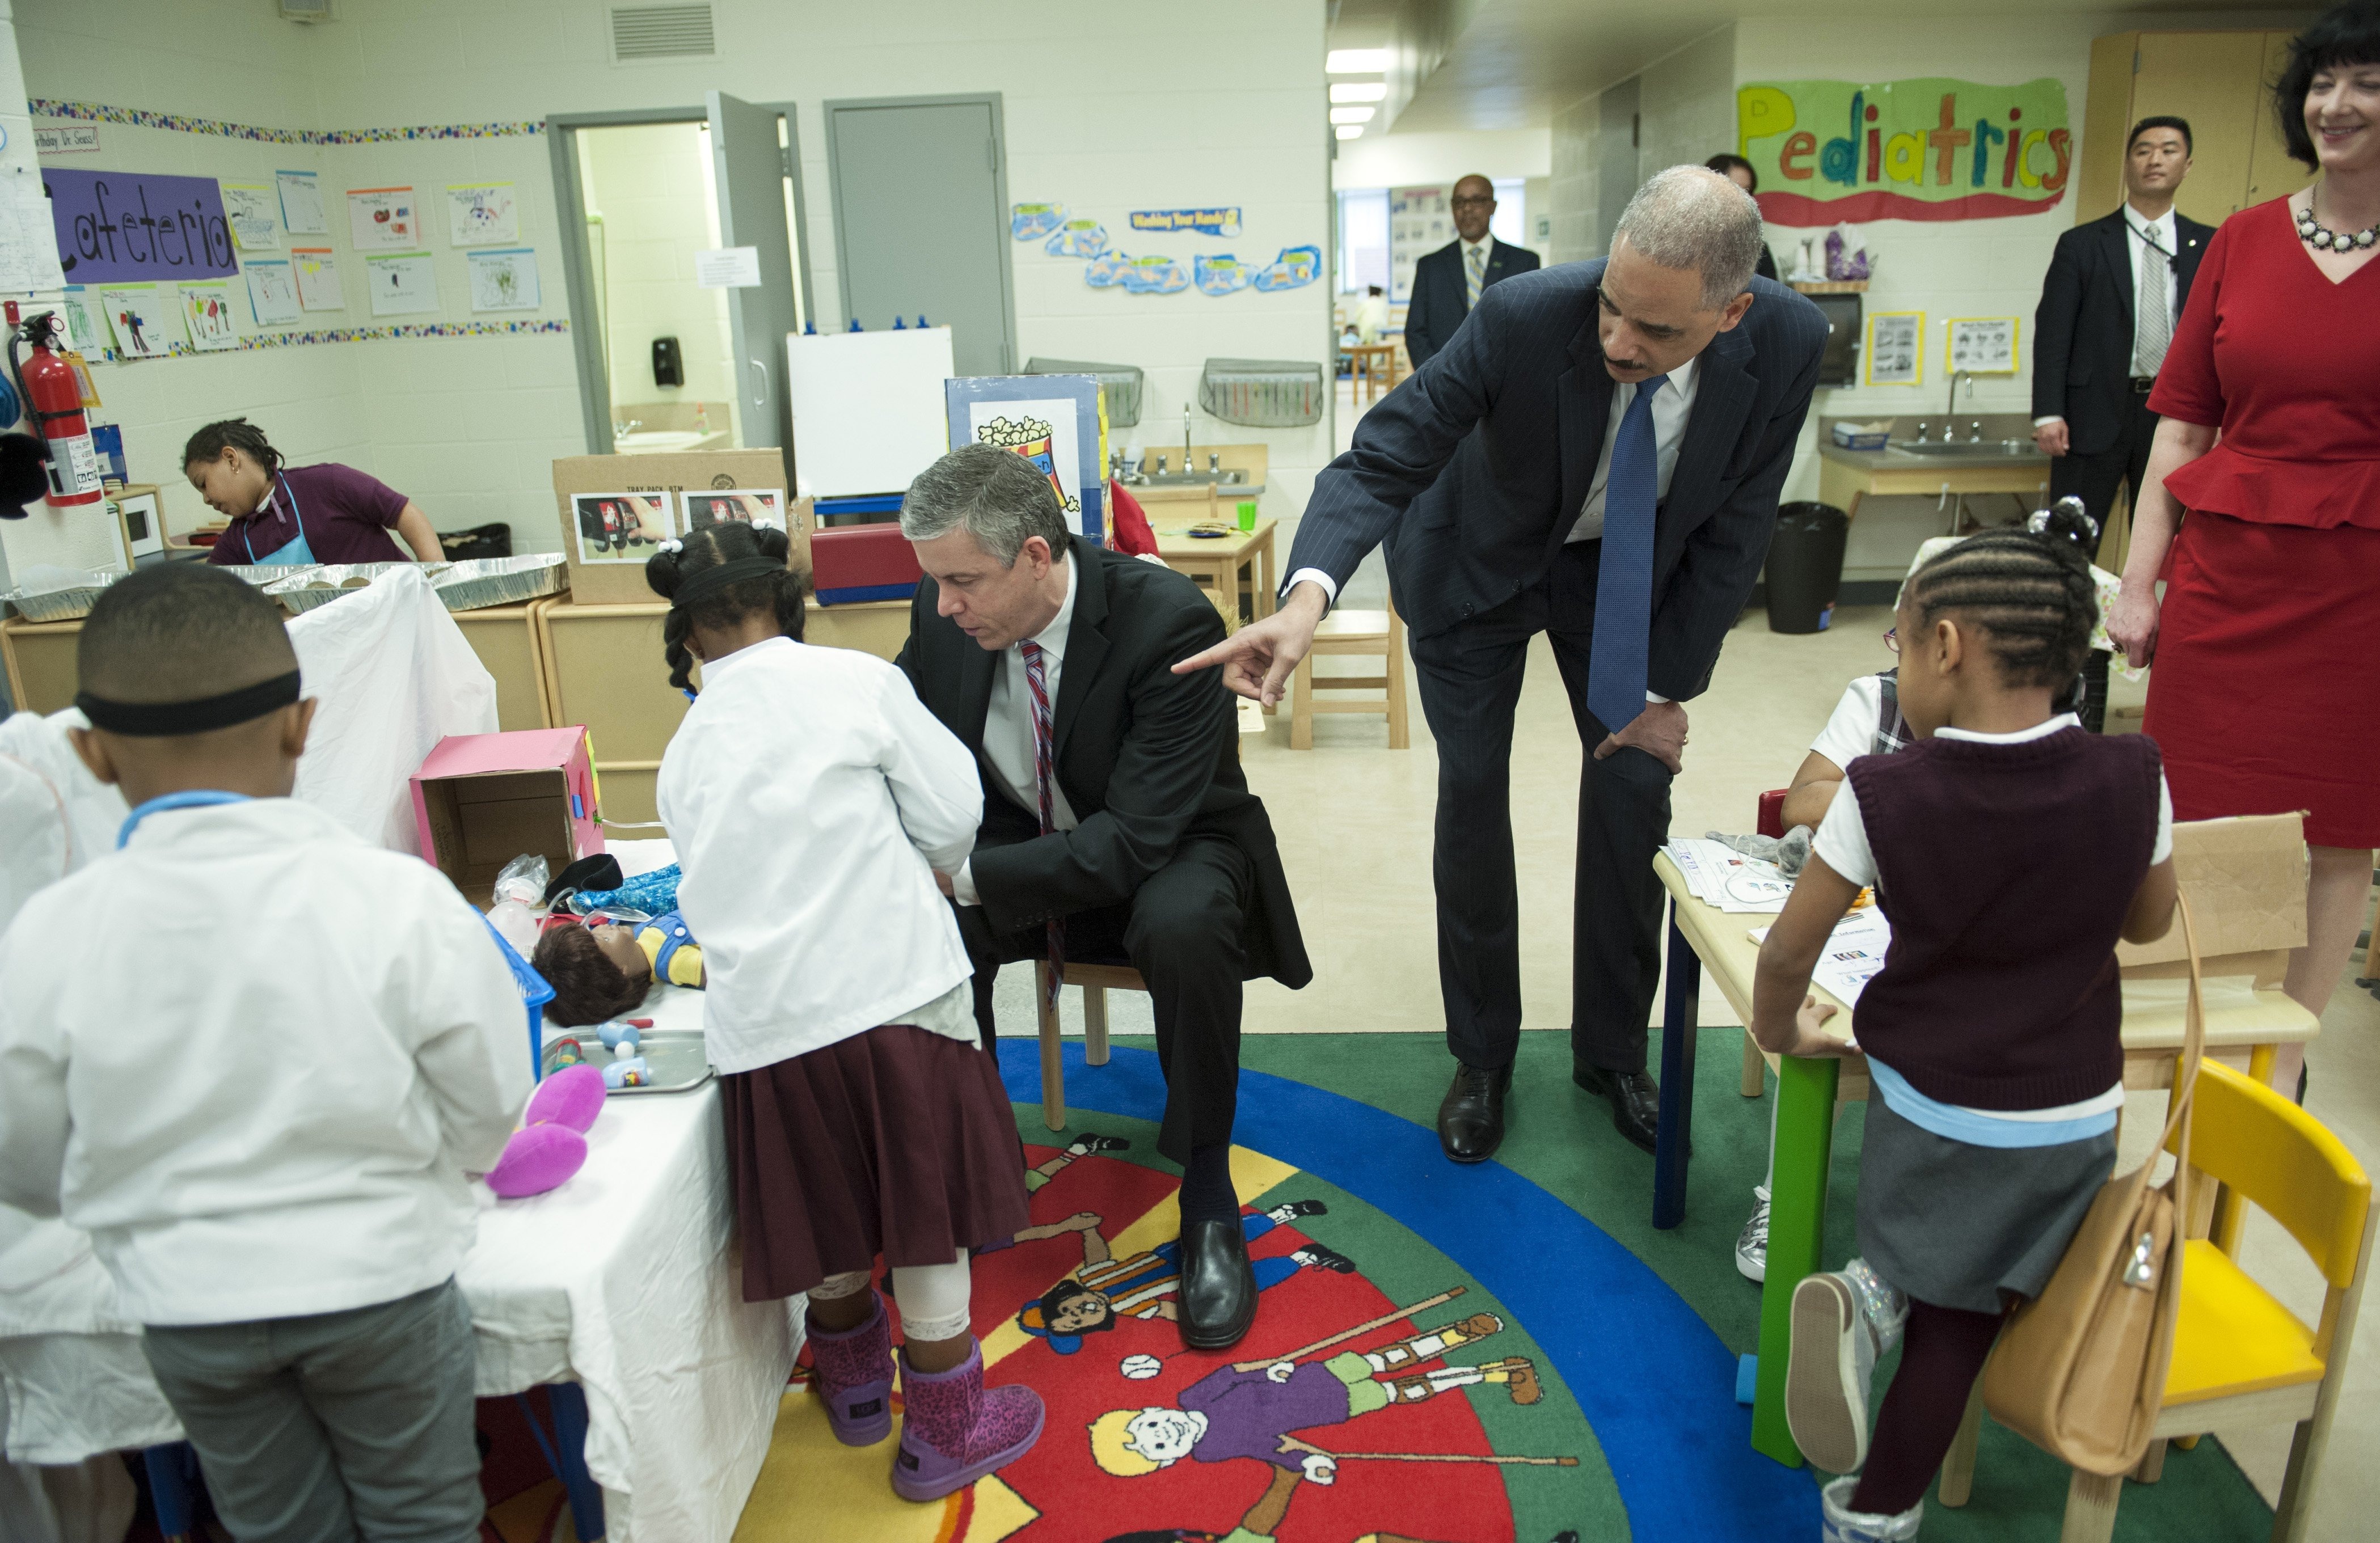 Education Secretary Arne Duncan and Attorney General Eric Holder meet with a preschool class prior to participating in a discussion on the importance of universal access to preschool at J. Ormond Wilson Elementary School in Washington.